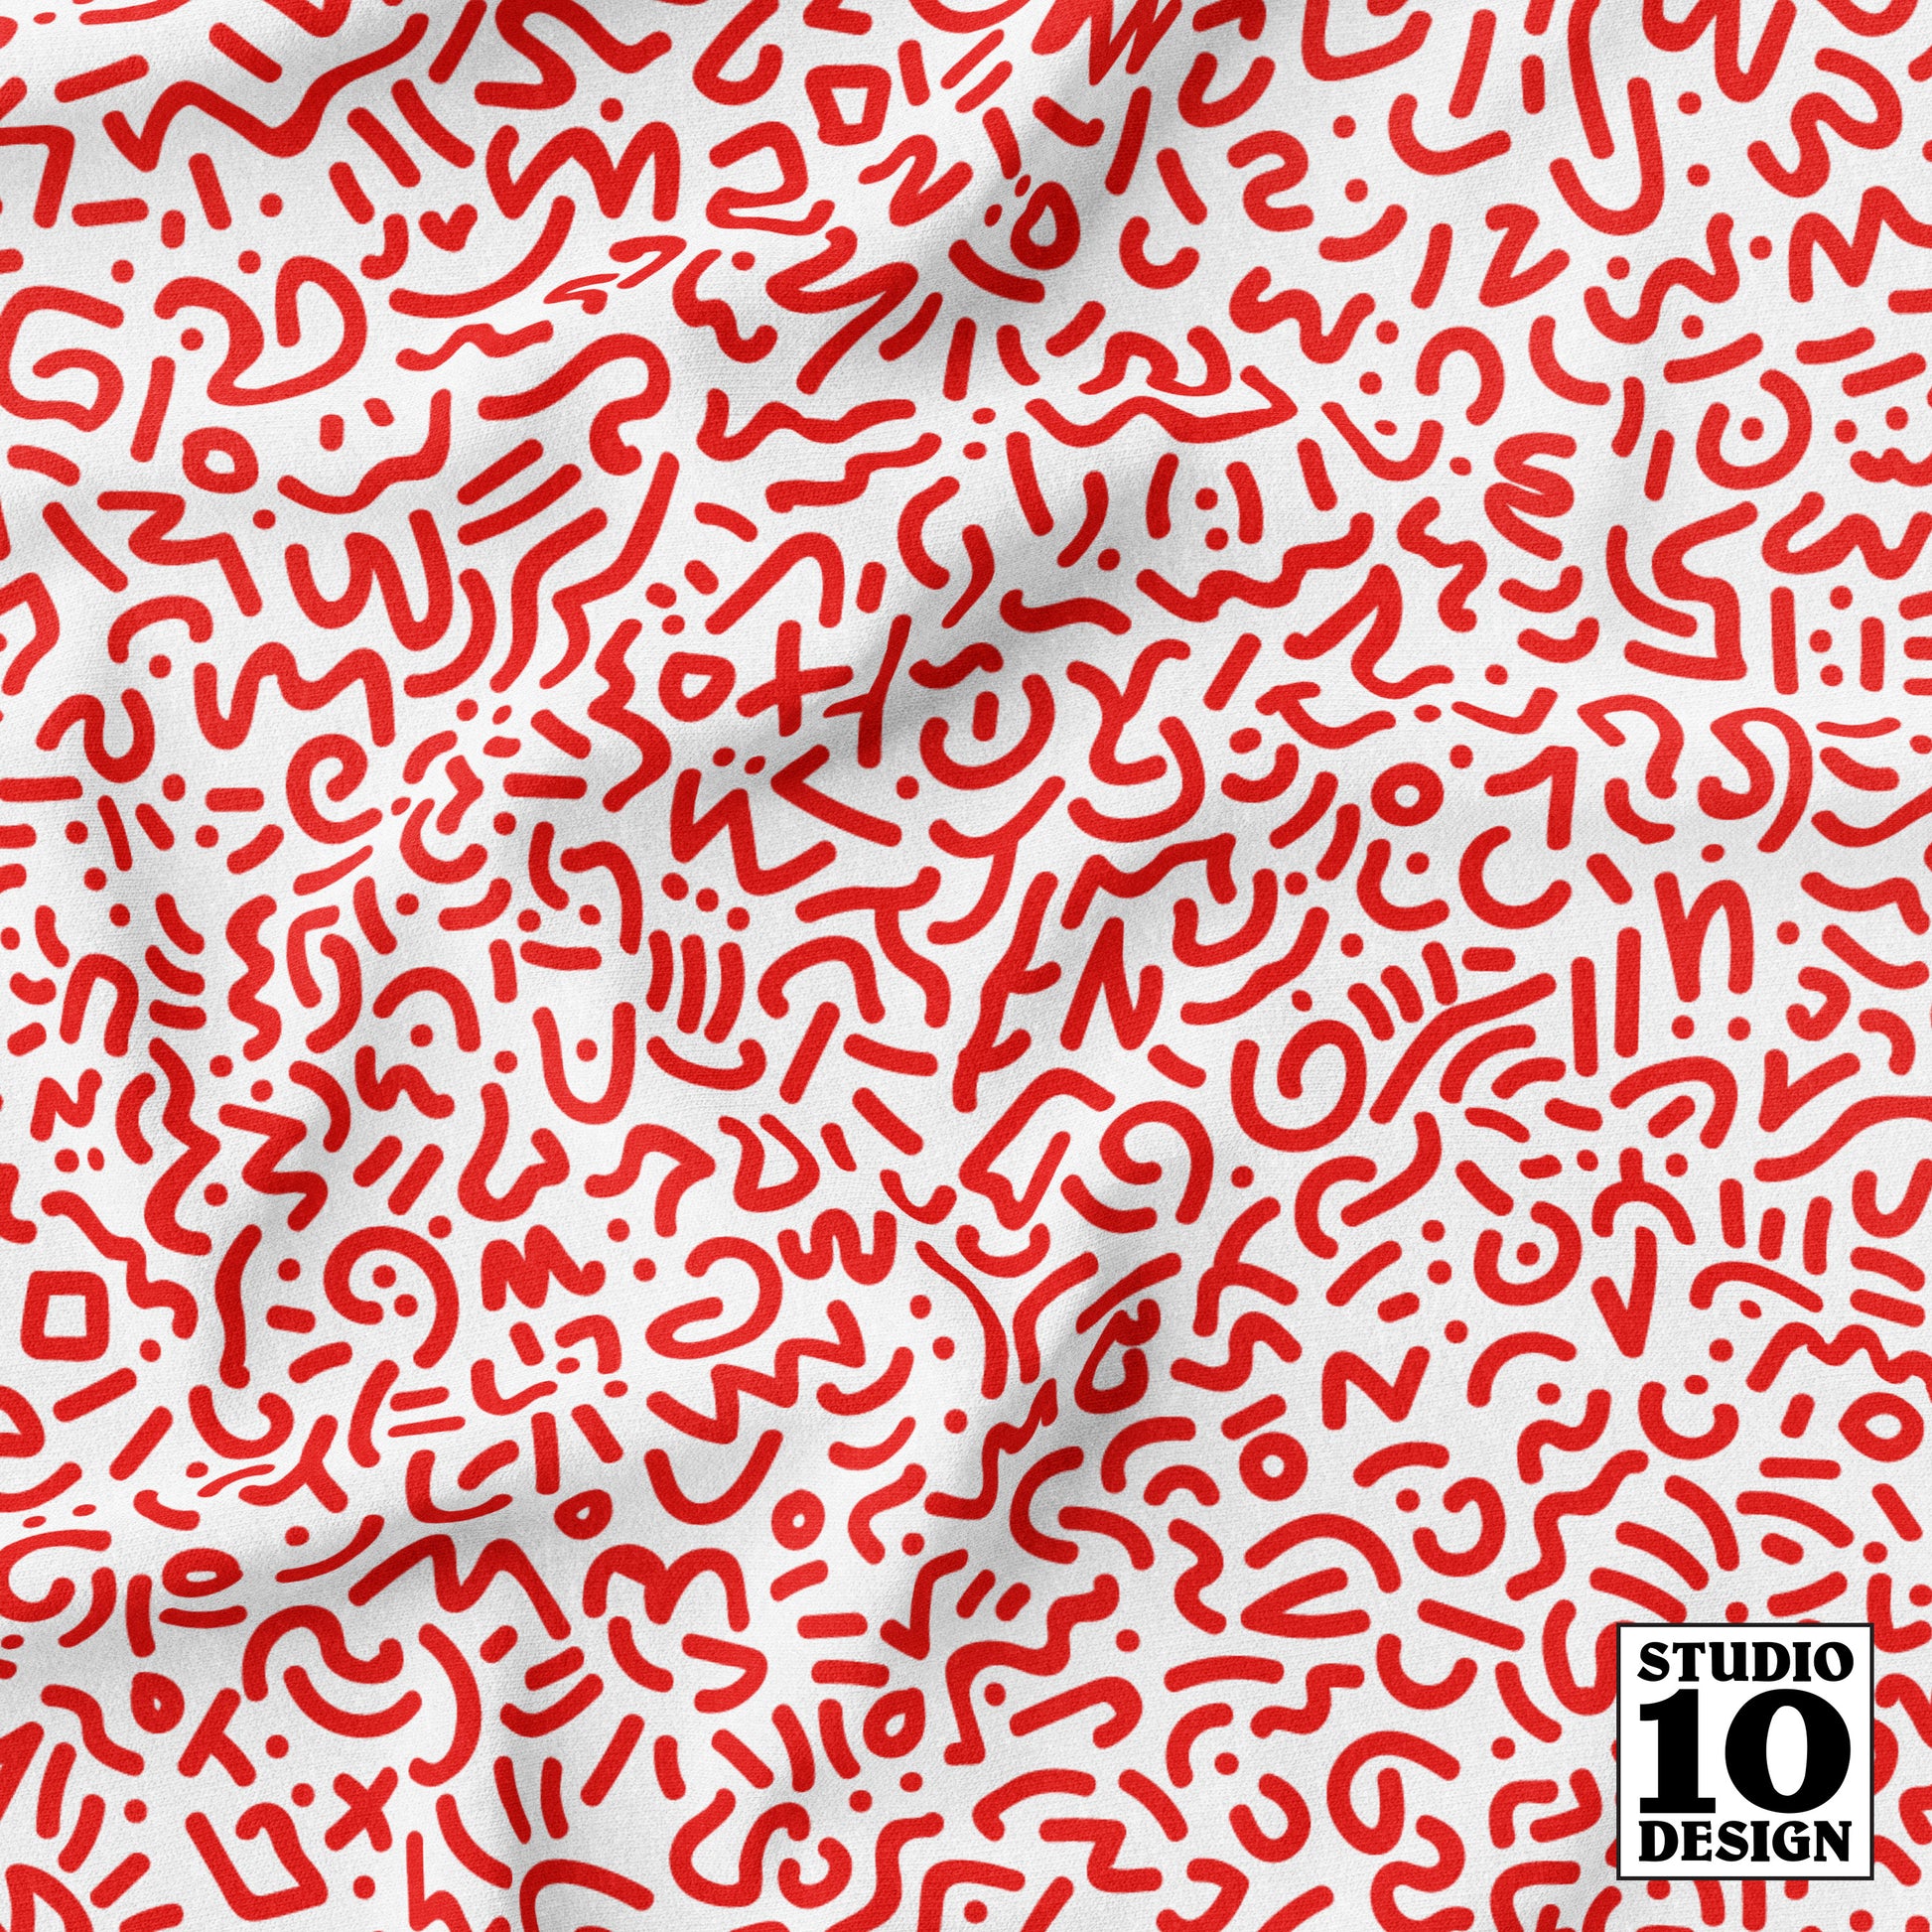 Doodle Red+White Printed Fabric by Studio Ten Design